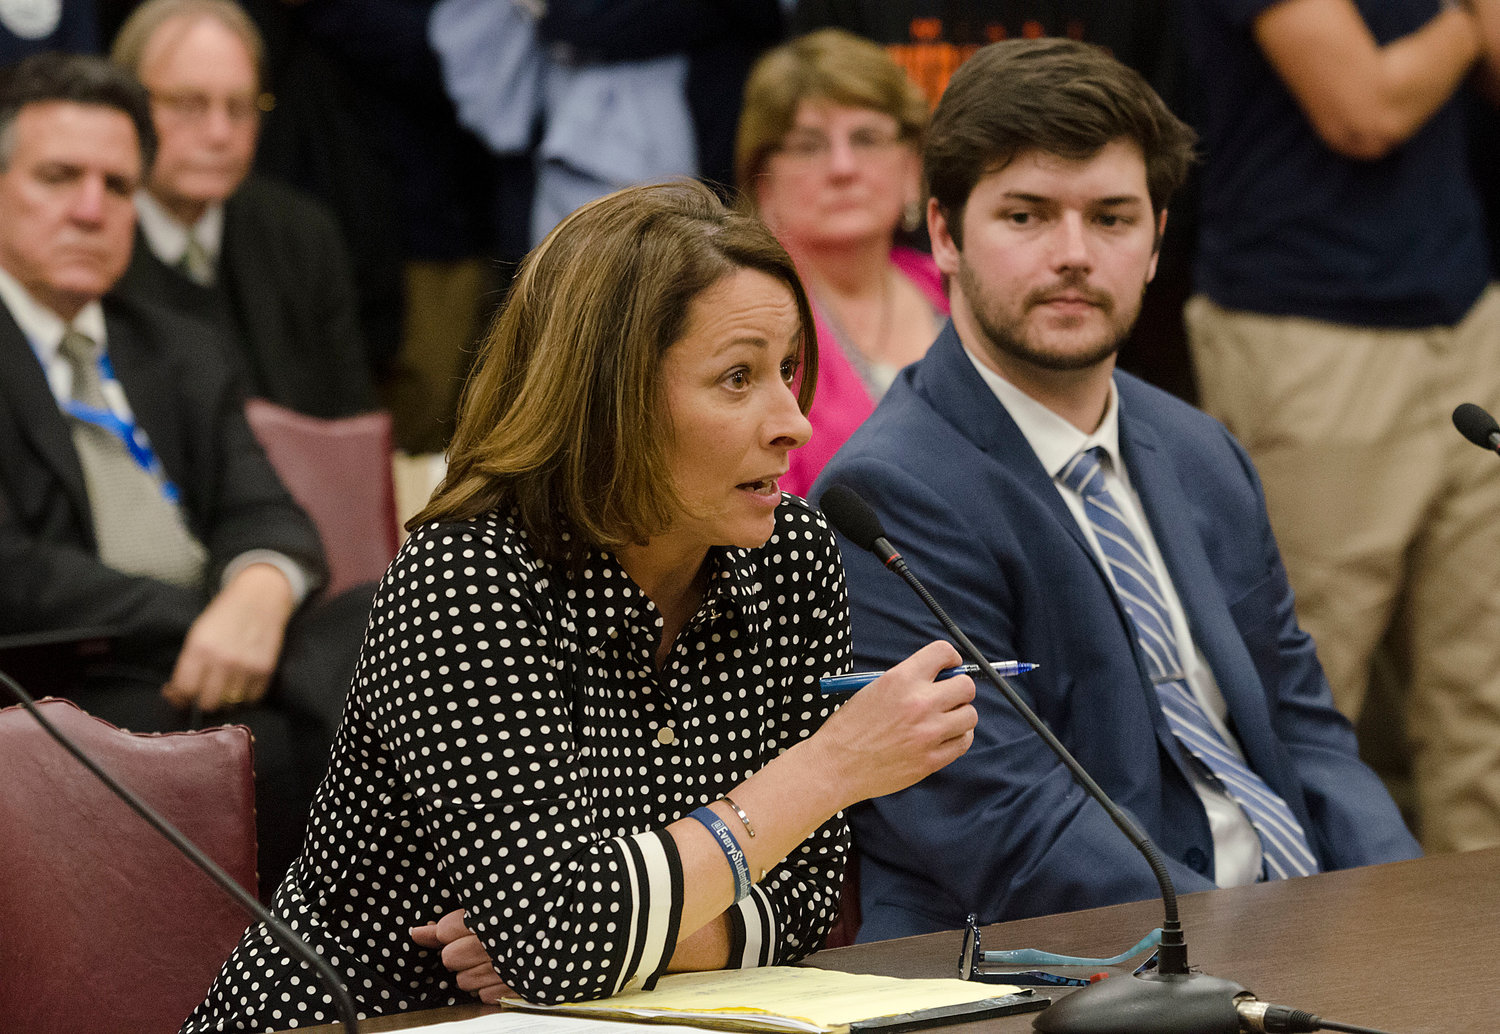 "Parents are partners and that needs to be institutionalized as well," testified Francine M. Roy, a parent of two boys that have been through the Portsmouth school system.